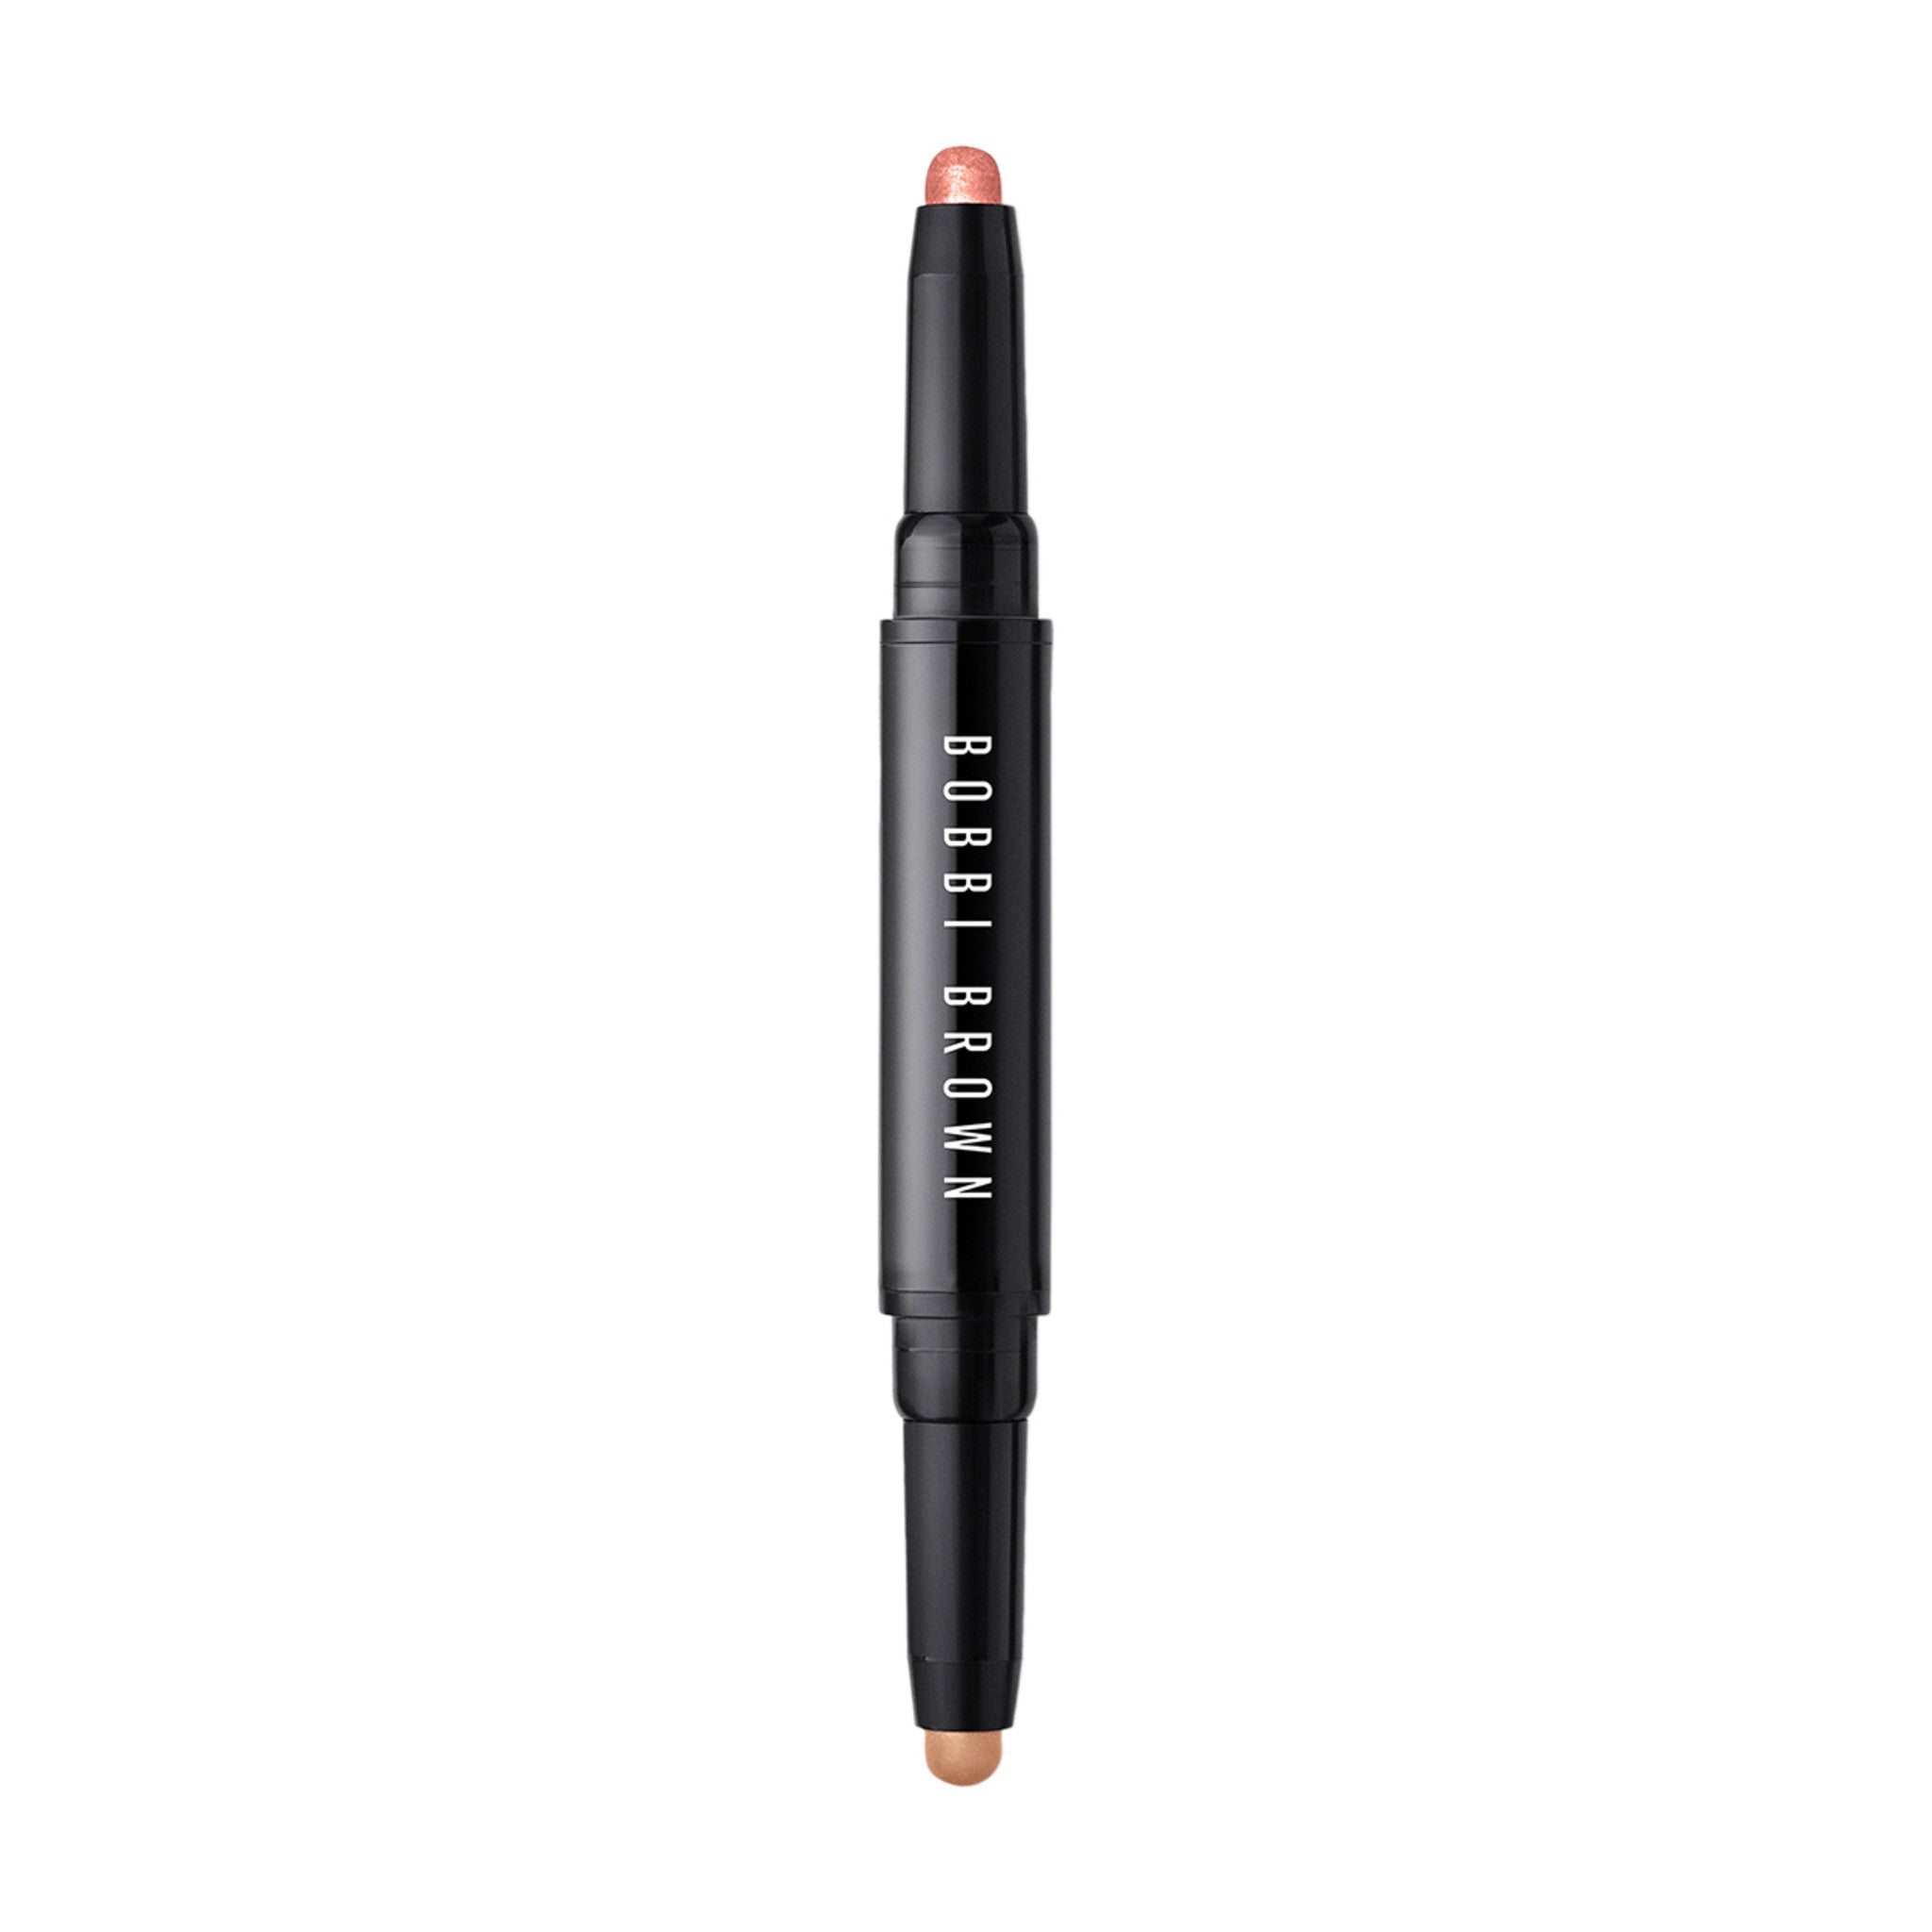 Bobbi Brown Dual-Ended Long-Wear Cream Shadow Stick Color/Shade variant: Pink Copper/Cashew main image.